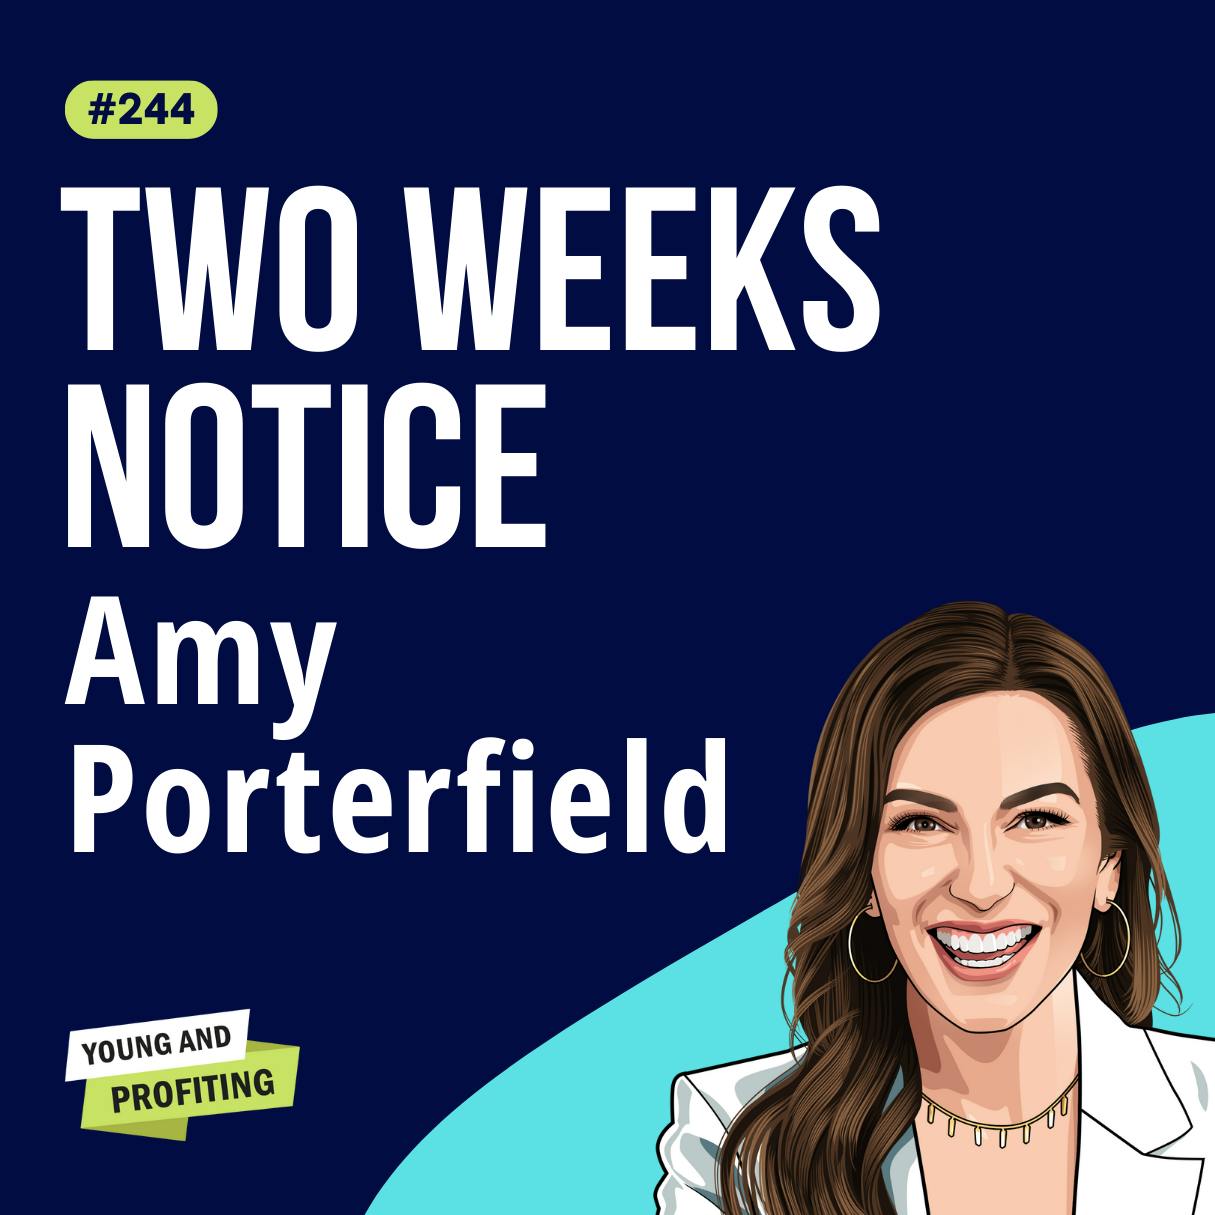 Amy Porterfield: How I Quit My Job and Built a Multi-Million Dollar Business Online, My Step-By-Step Blueprint | E244 by Hala Taha | YAP Media Network